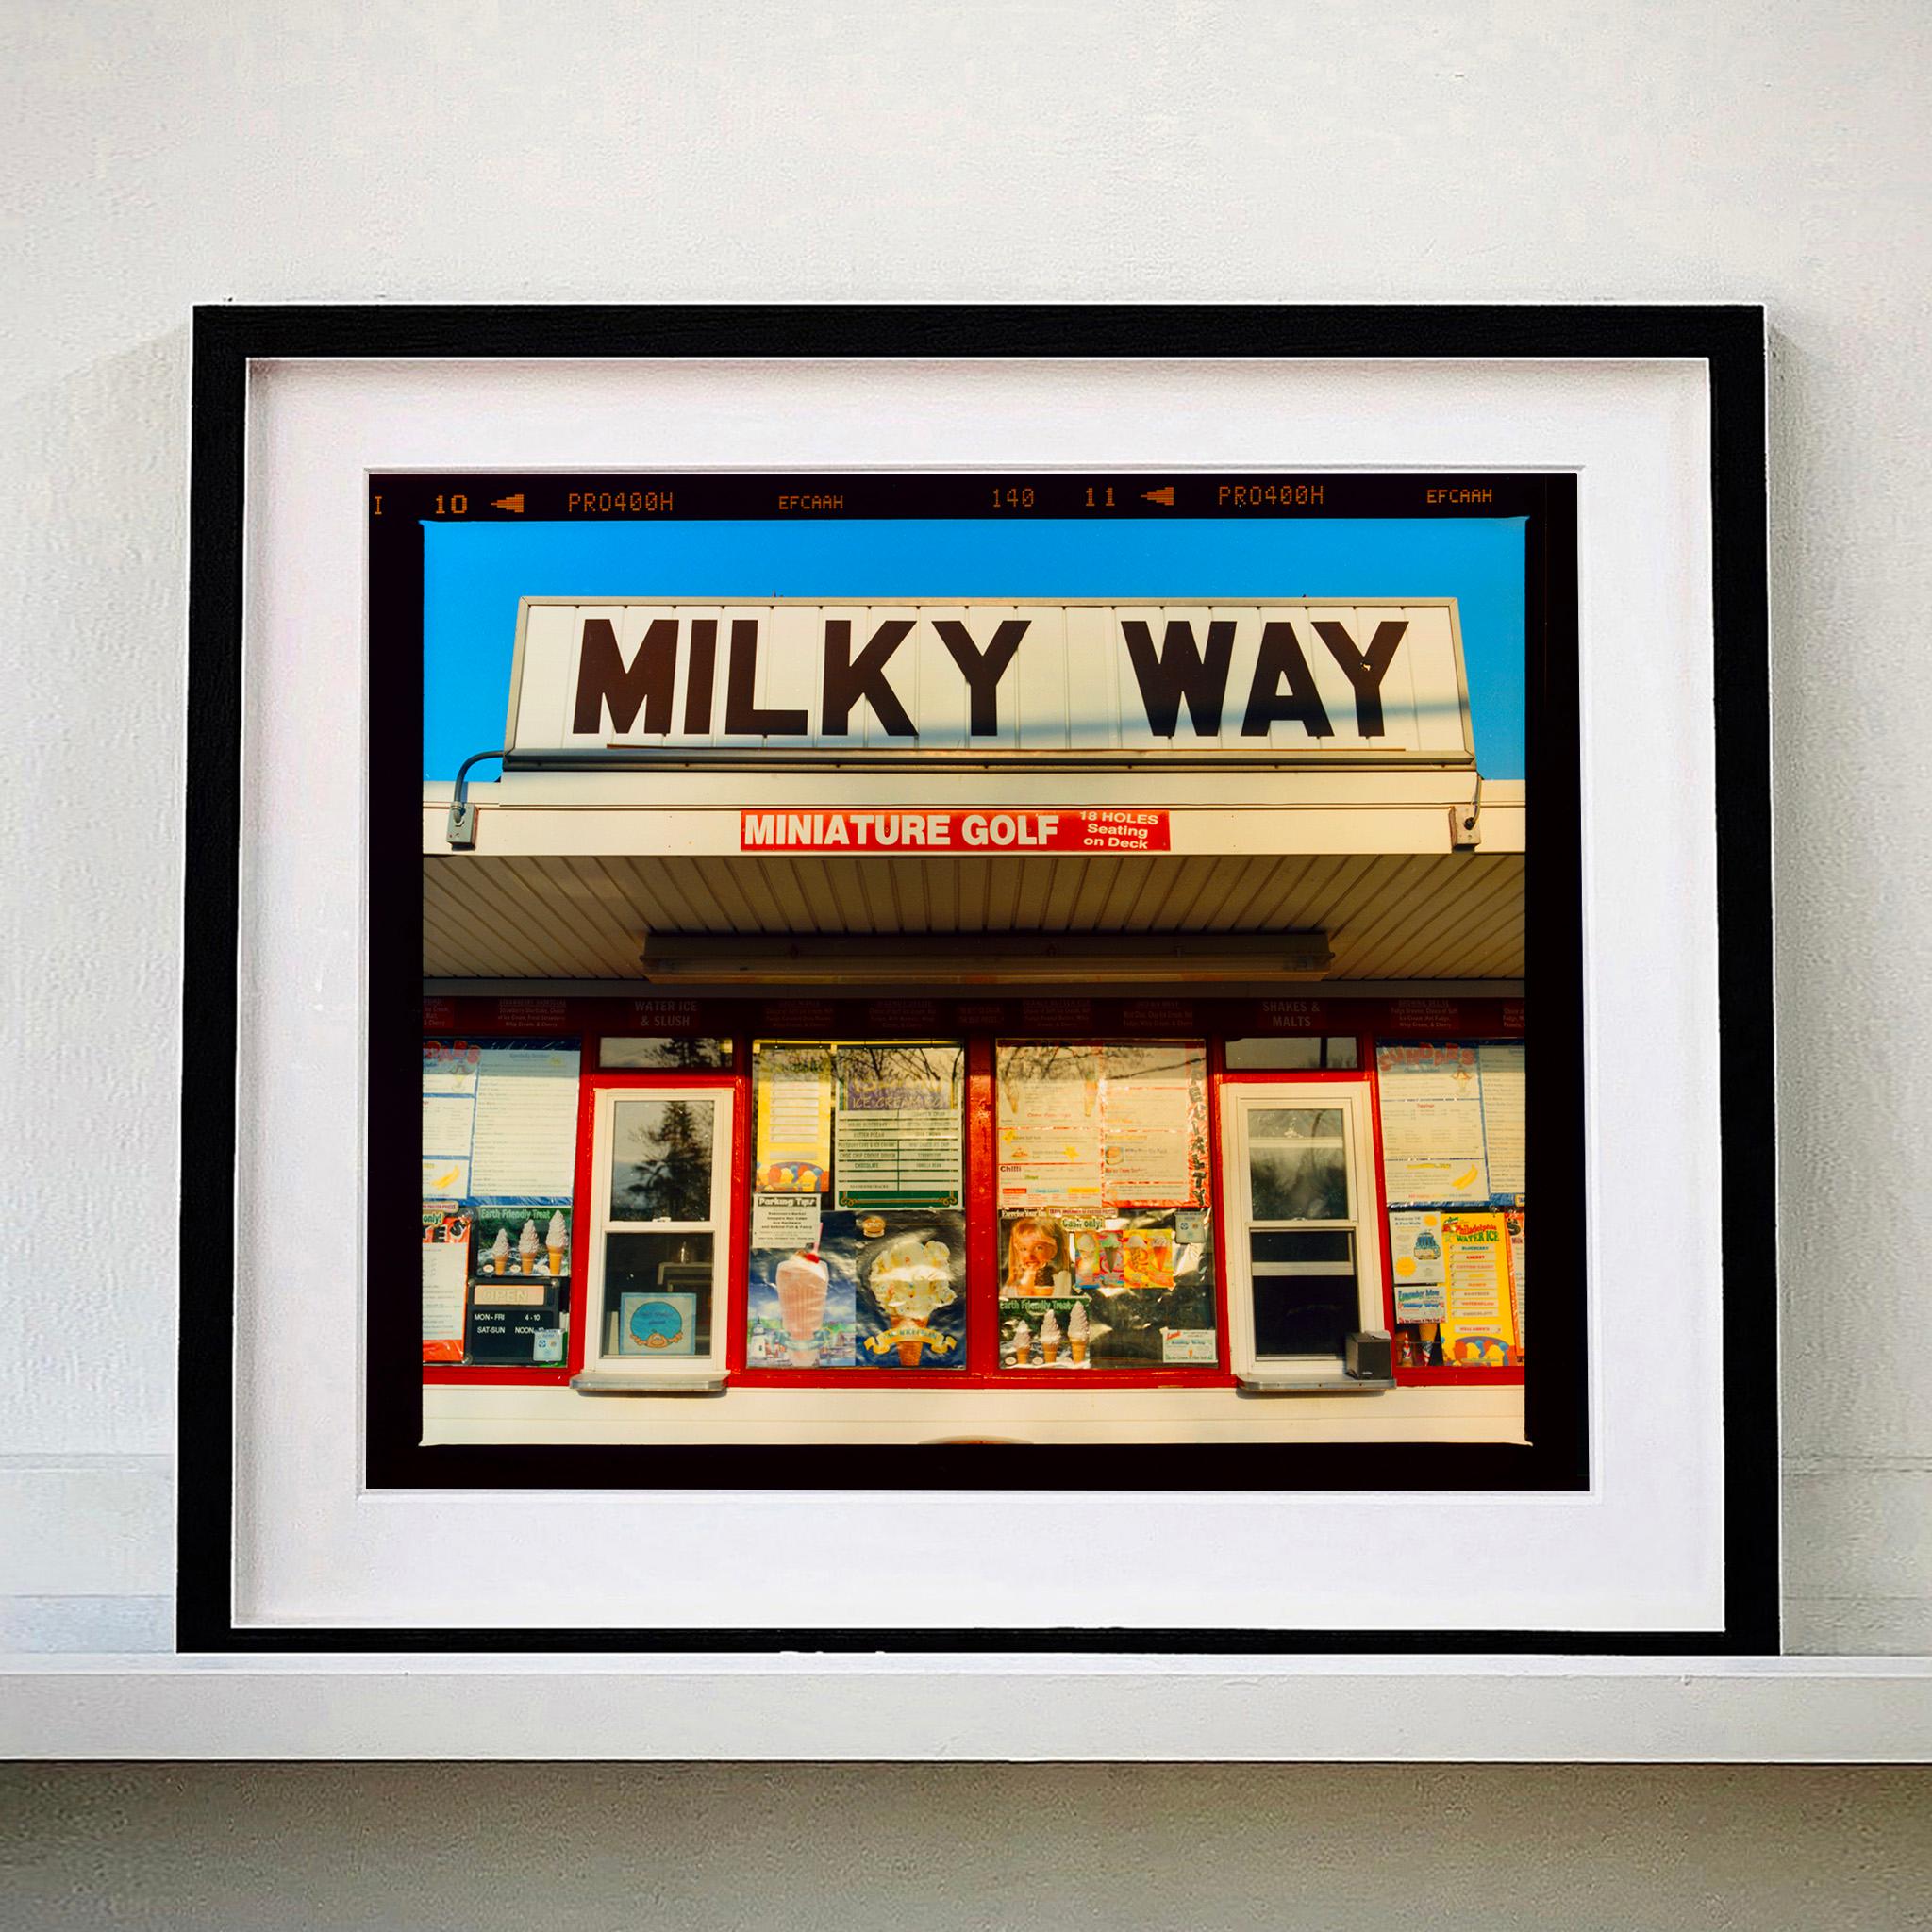 Milky Way, New Jersey - American Color Street Photography - Black Color Photograph by Richard Heeps